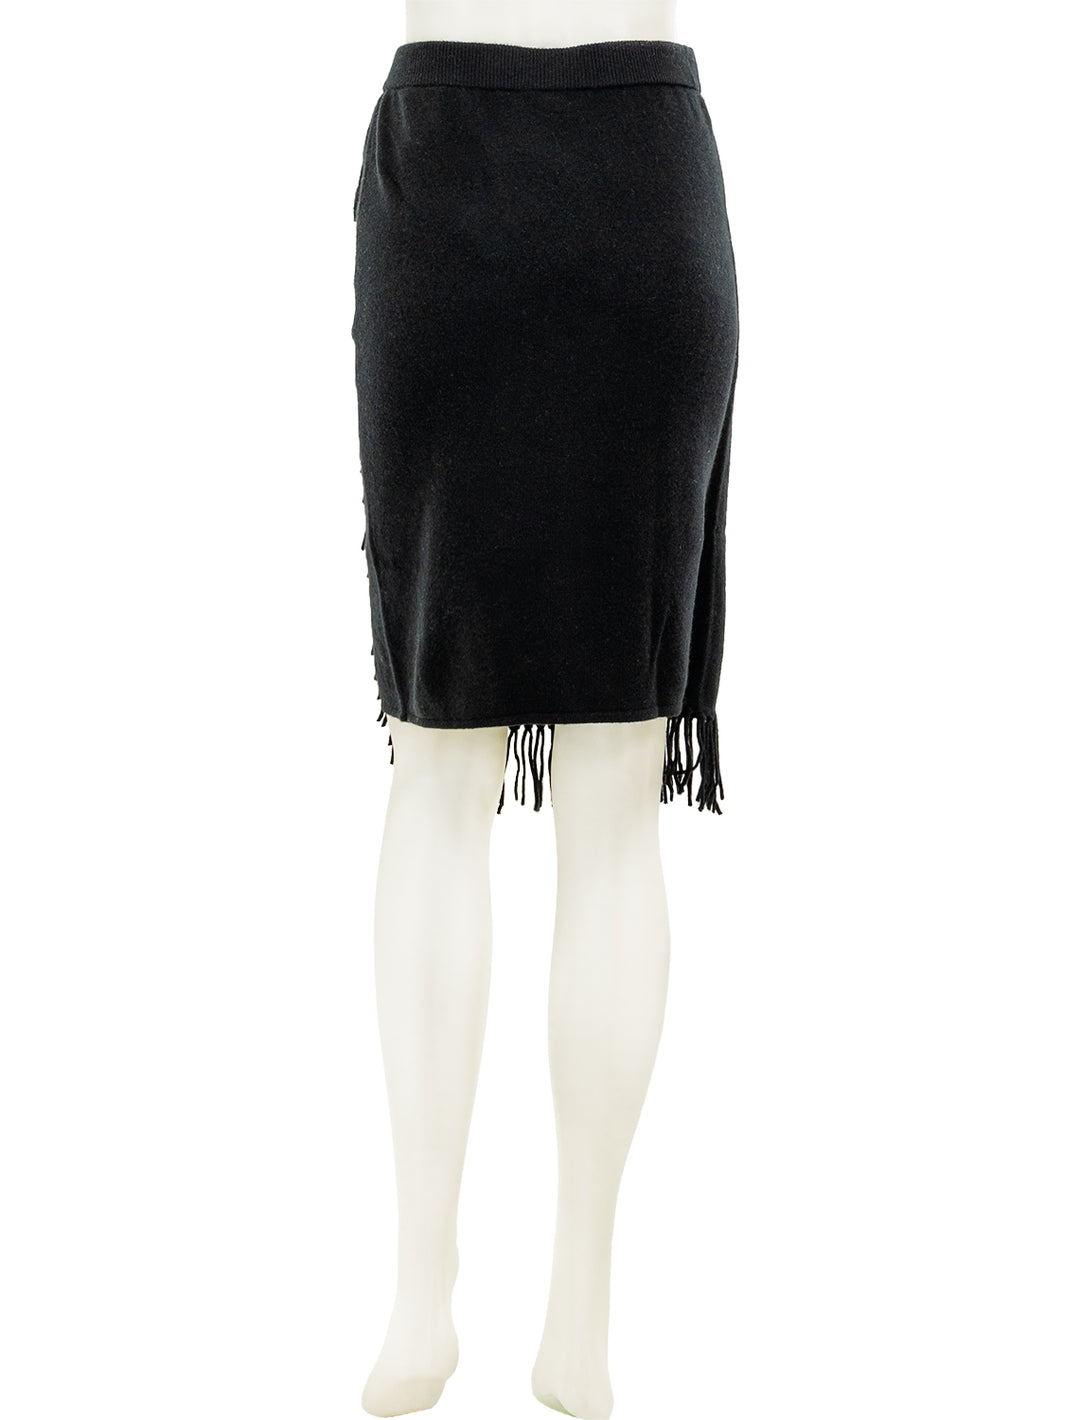 Back view of Minnie Rose's wrap skirt with fringe in black.